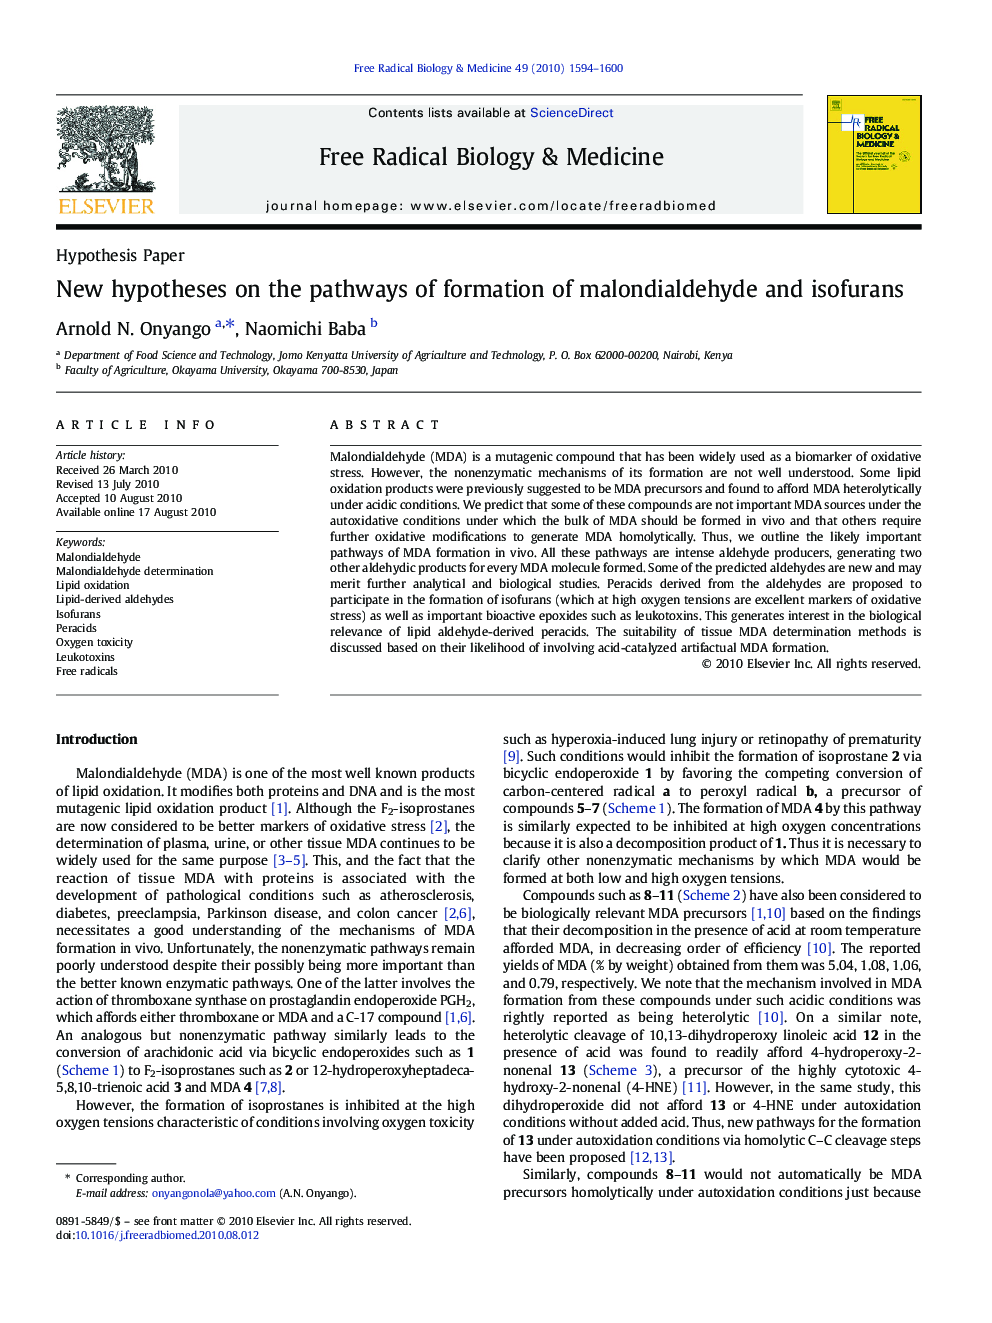 New hypotheses on the pathways of formation of malondialdehyde and isofurans